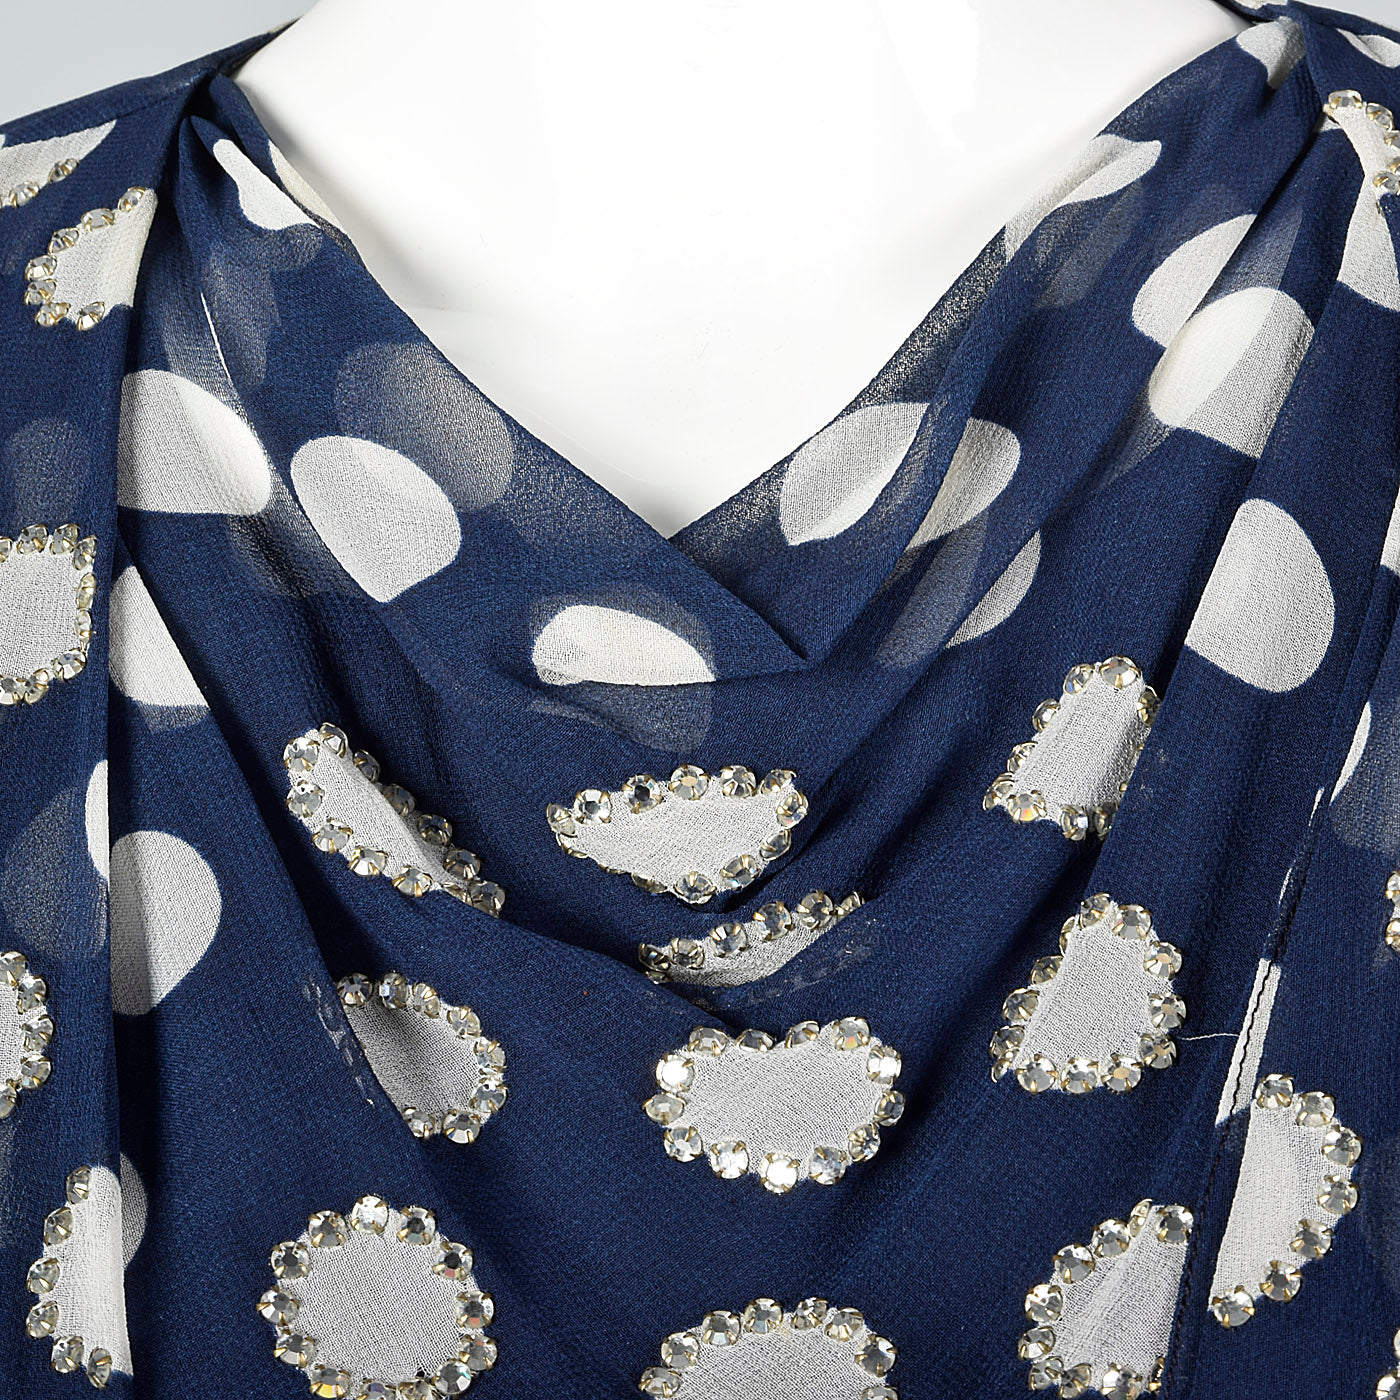 1970s Navy Dress with White Polka Dots